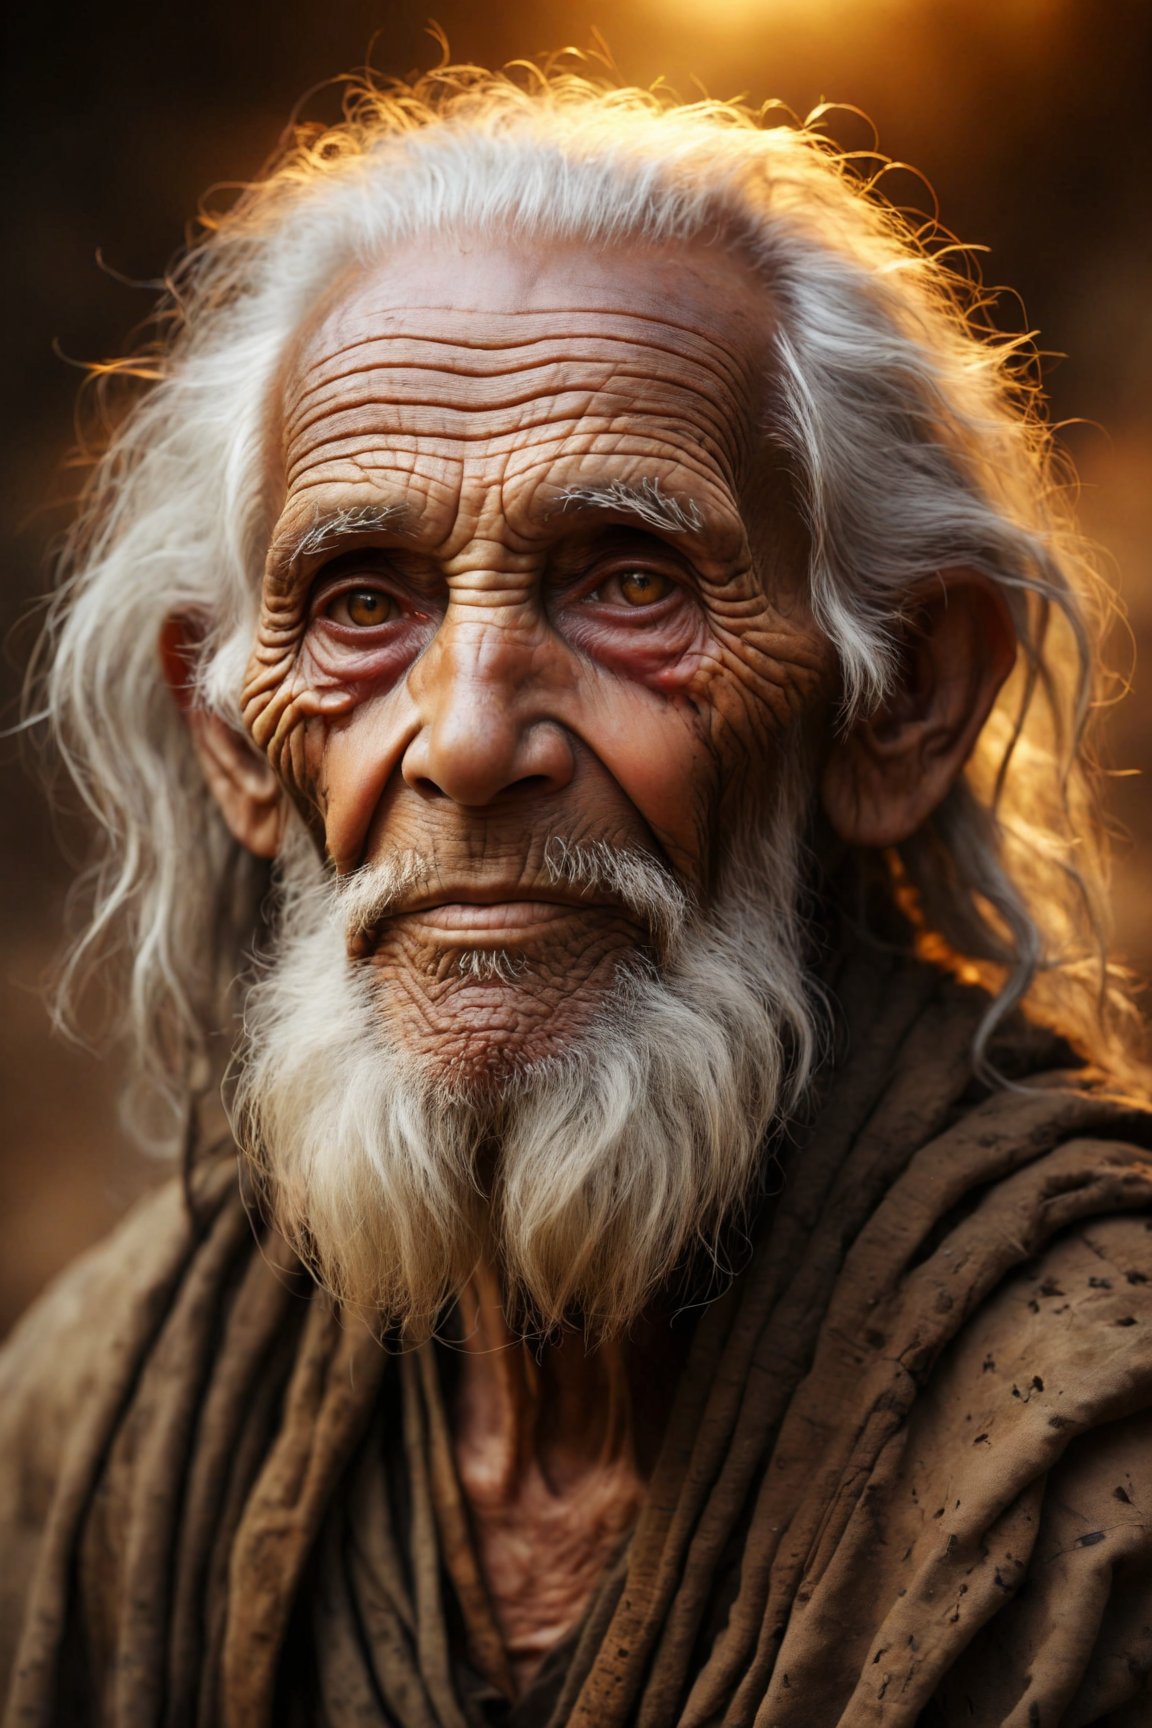 Create a portrait of a wise elder with weathered features, illuminated by soft, golden light, exuding a sense of dignity and wisdom that speaks volumes without a word